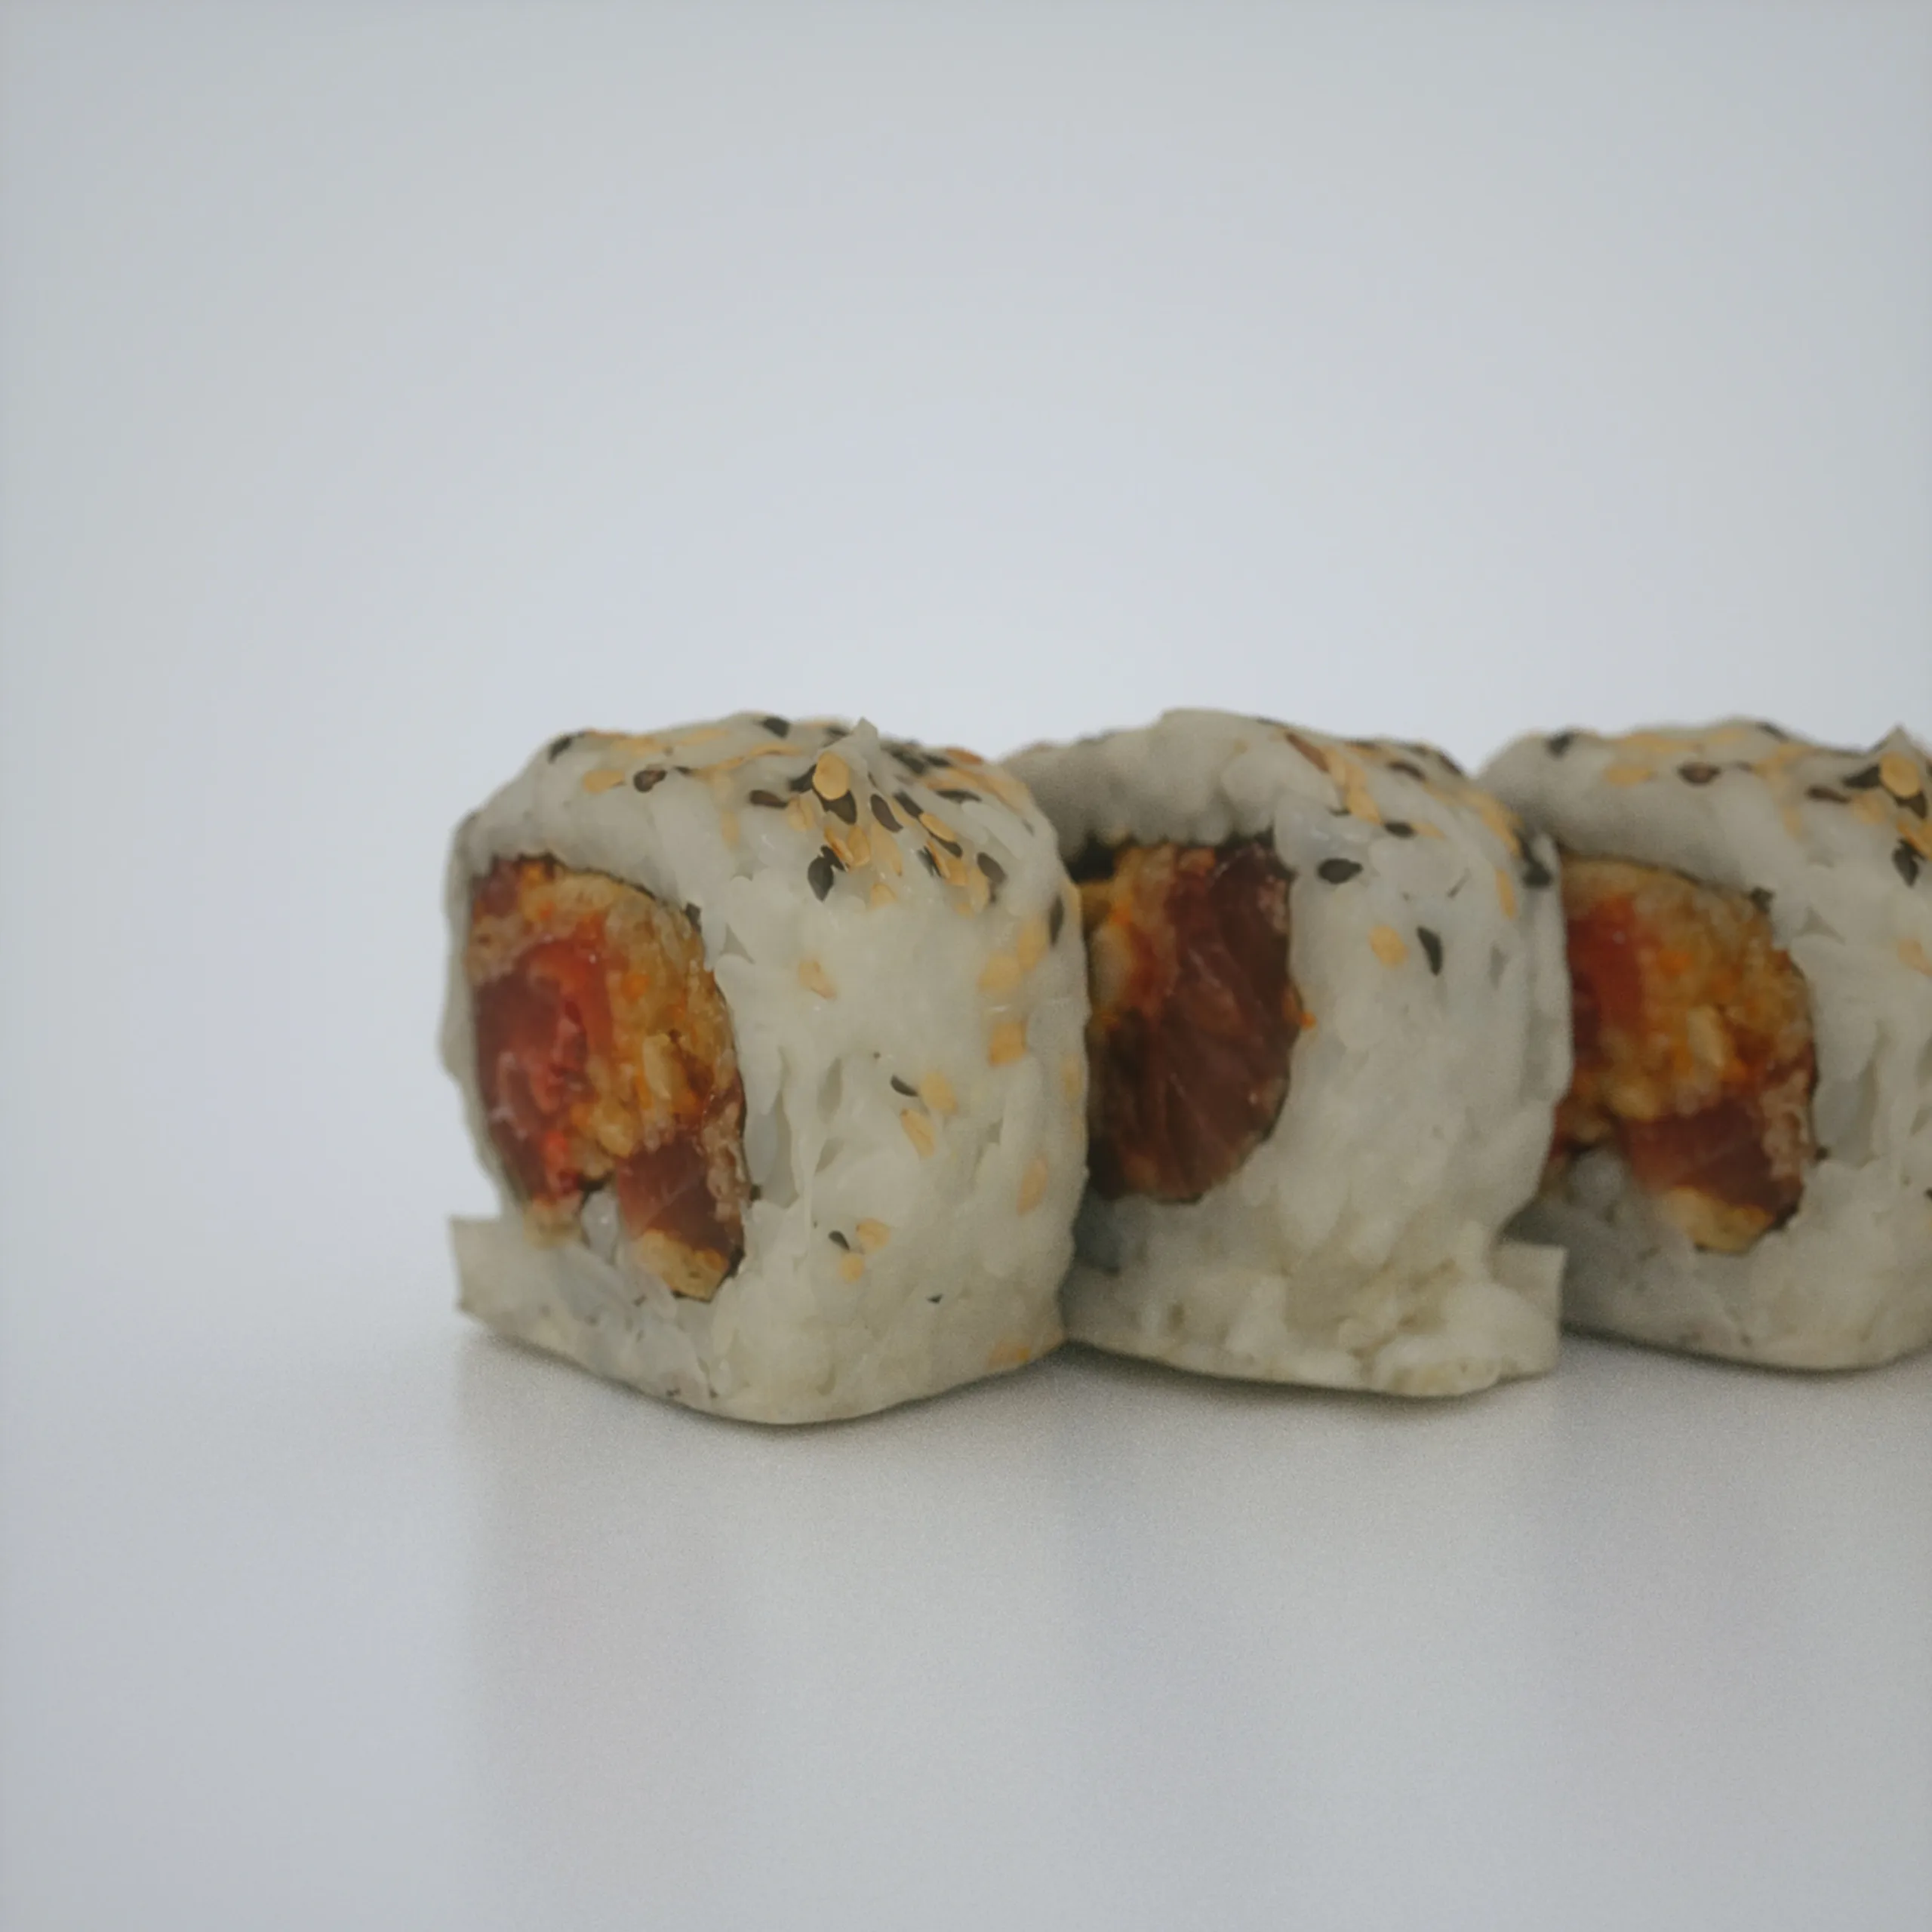 13-Piece 3D Scanned Sushi Collection: Lifelike OBJ Models with 4K Texture Map, Featuring California Rolls, Tuna Nigiri, Salmon Sashimi, and More